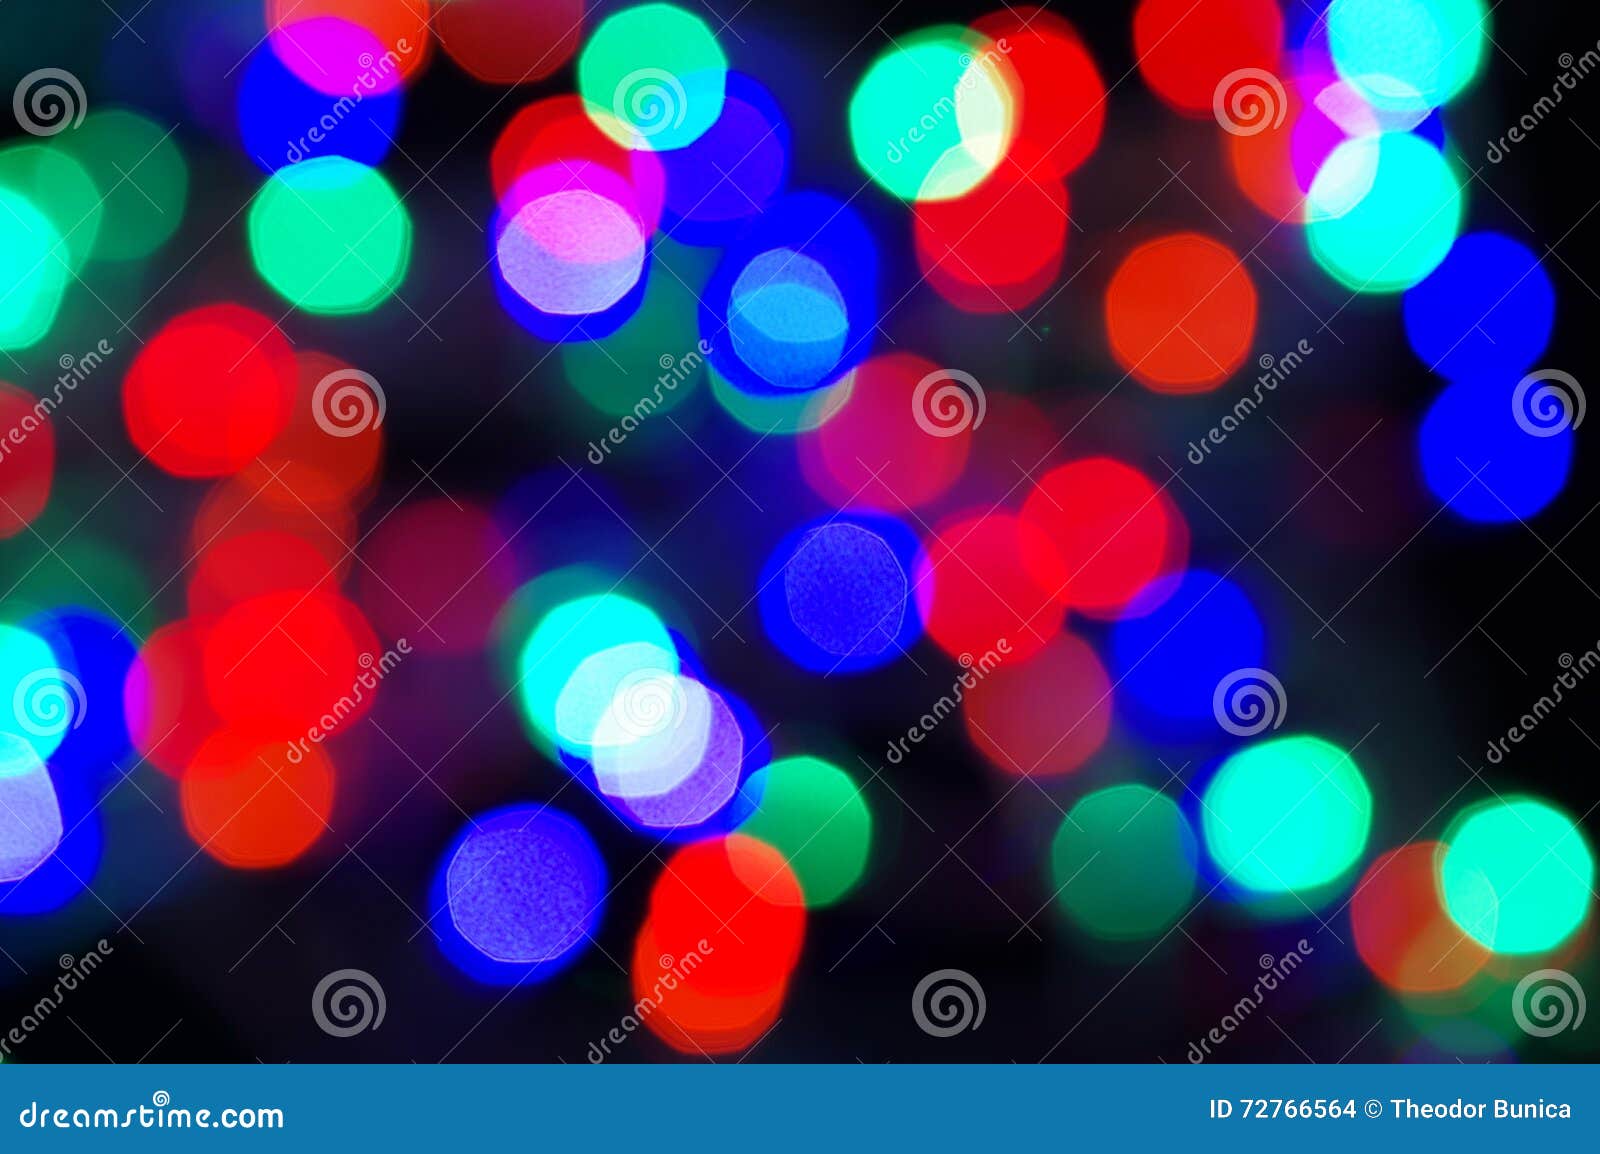 Play of Lights. Colored Abstract Background Stock Photo - Image of ...